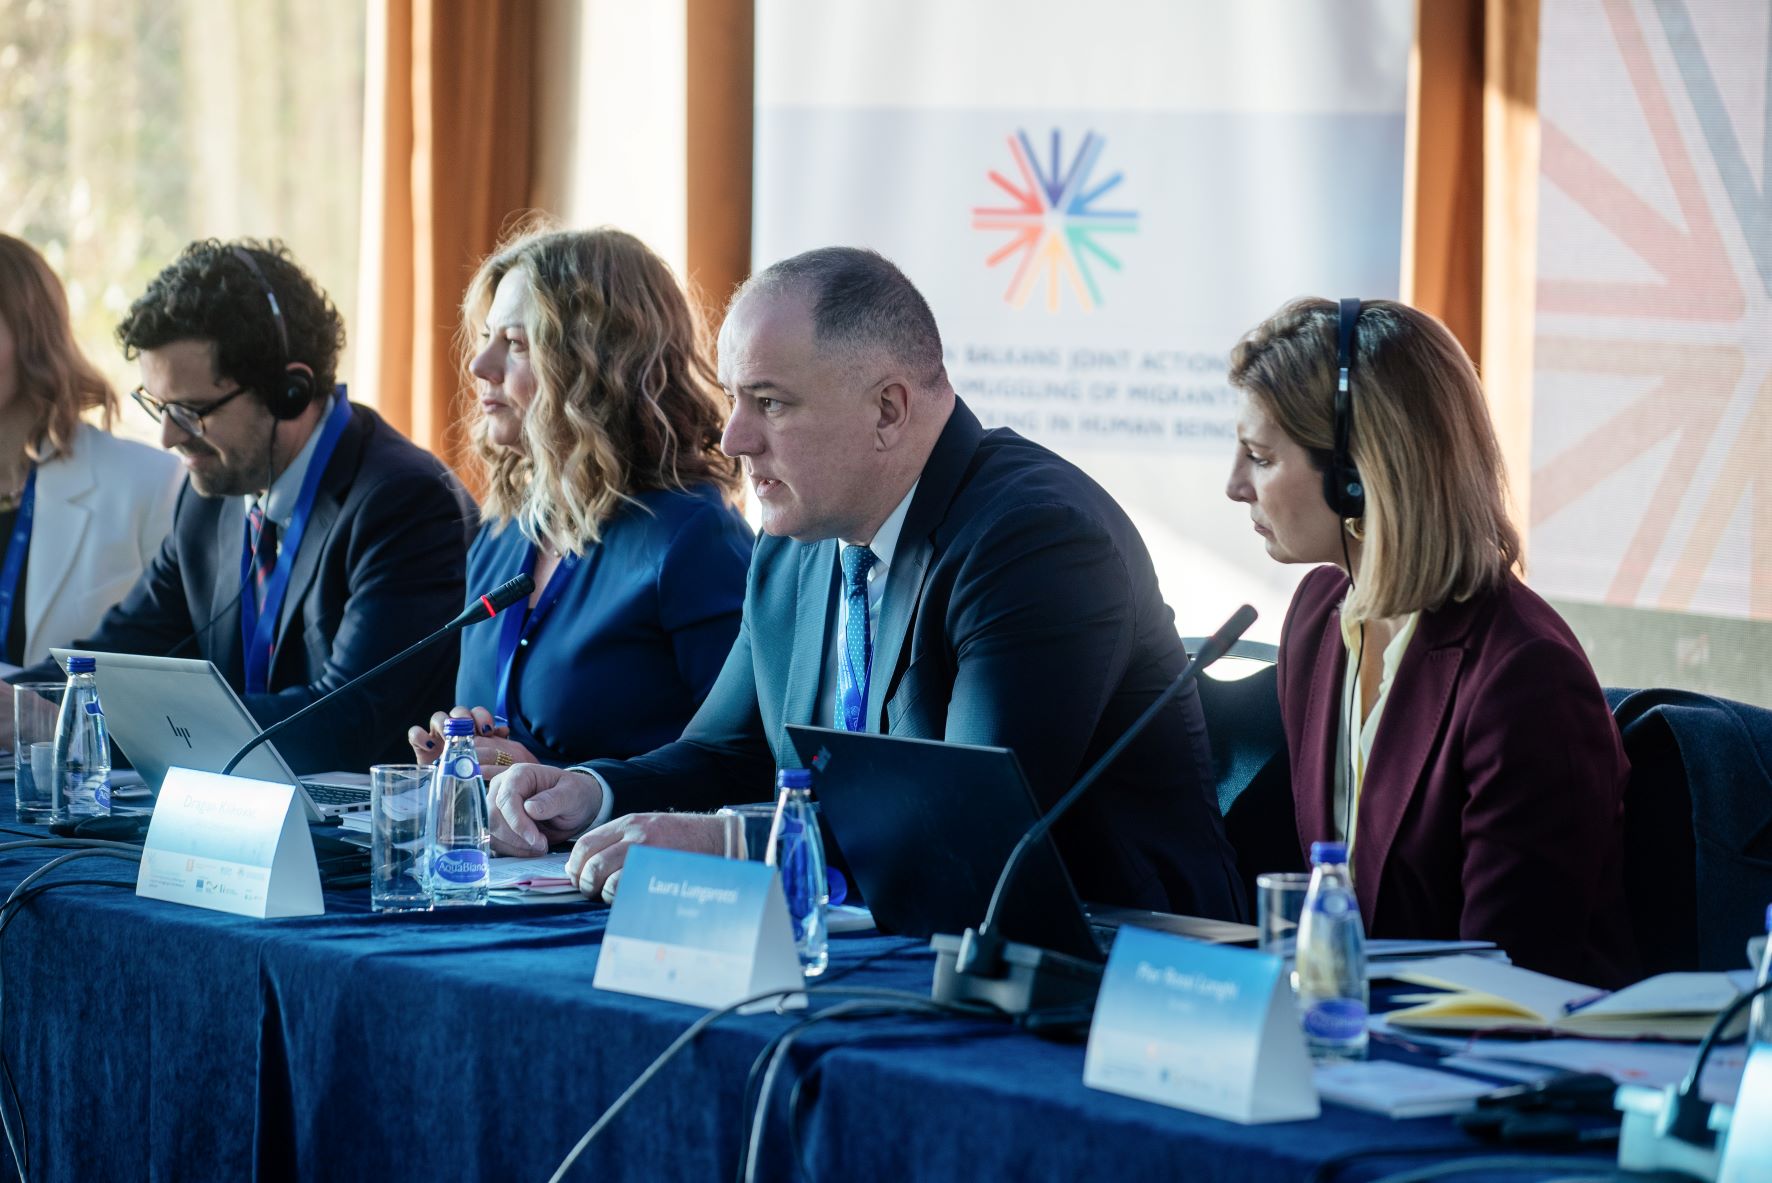 Countering Human Trafficking and Migrant Smuggling in the Western Balkans: key regional actors gather in Budva, Montenegro